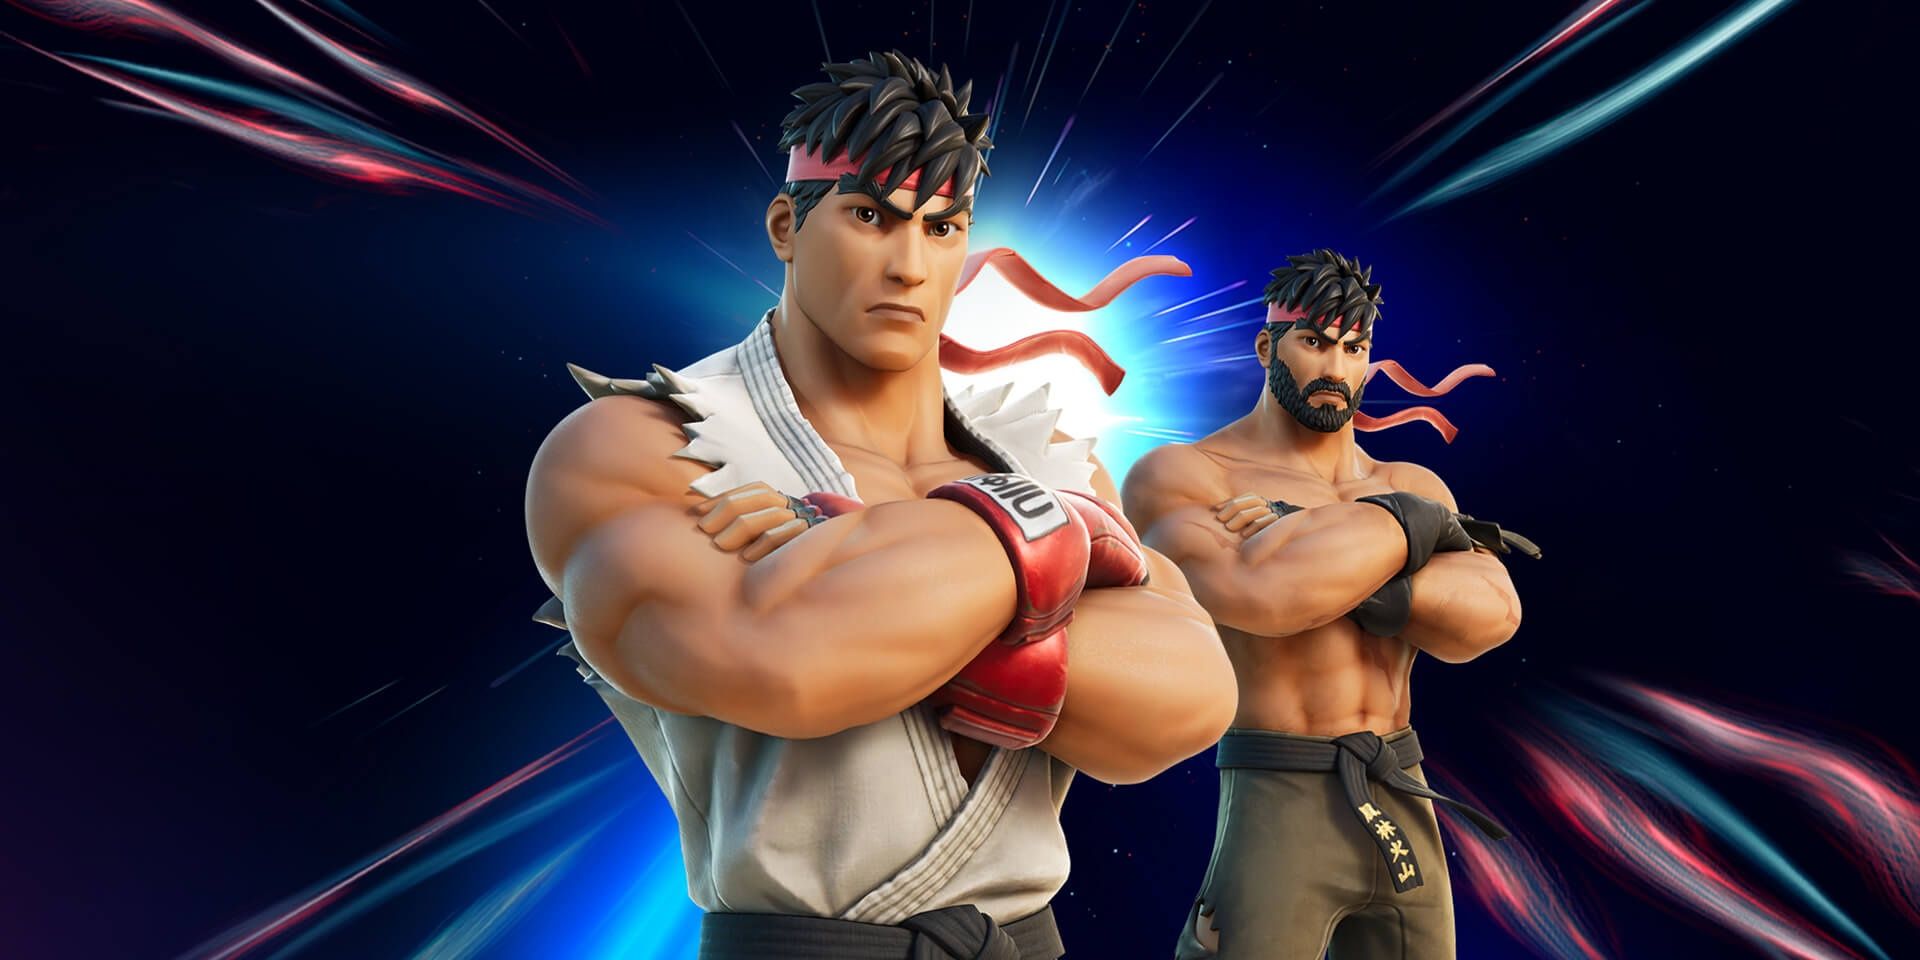 ryu from street fighter in fortnite